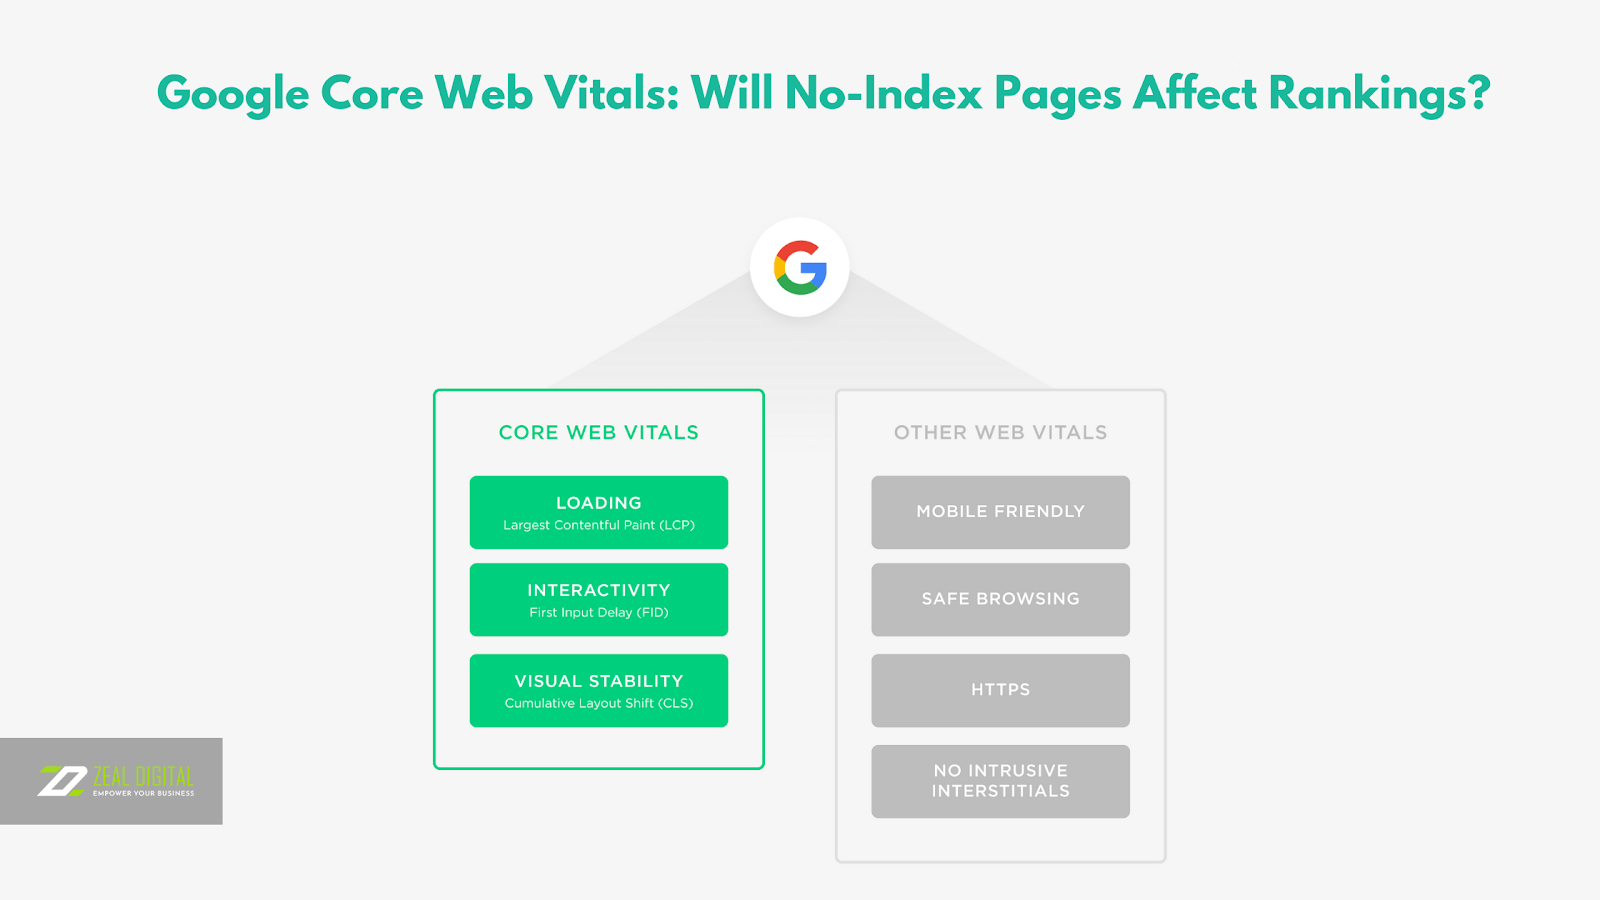 Google Core Web Vitals: Will No-Index Pages Affect Rankings?